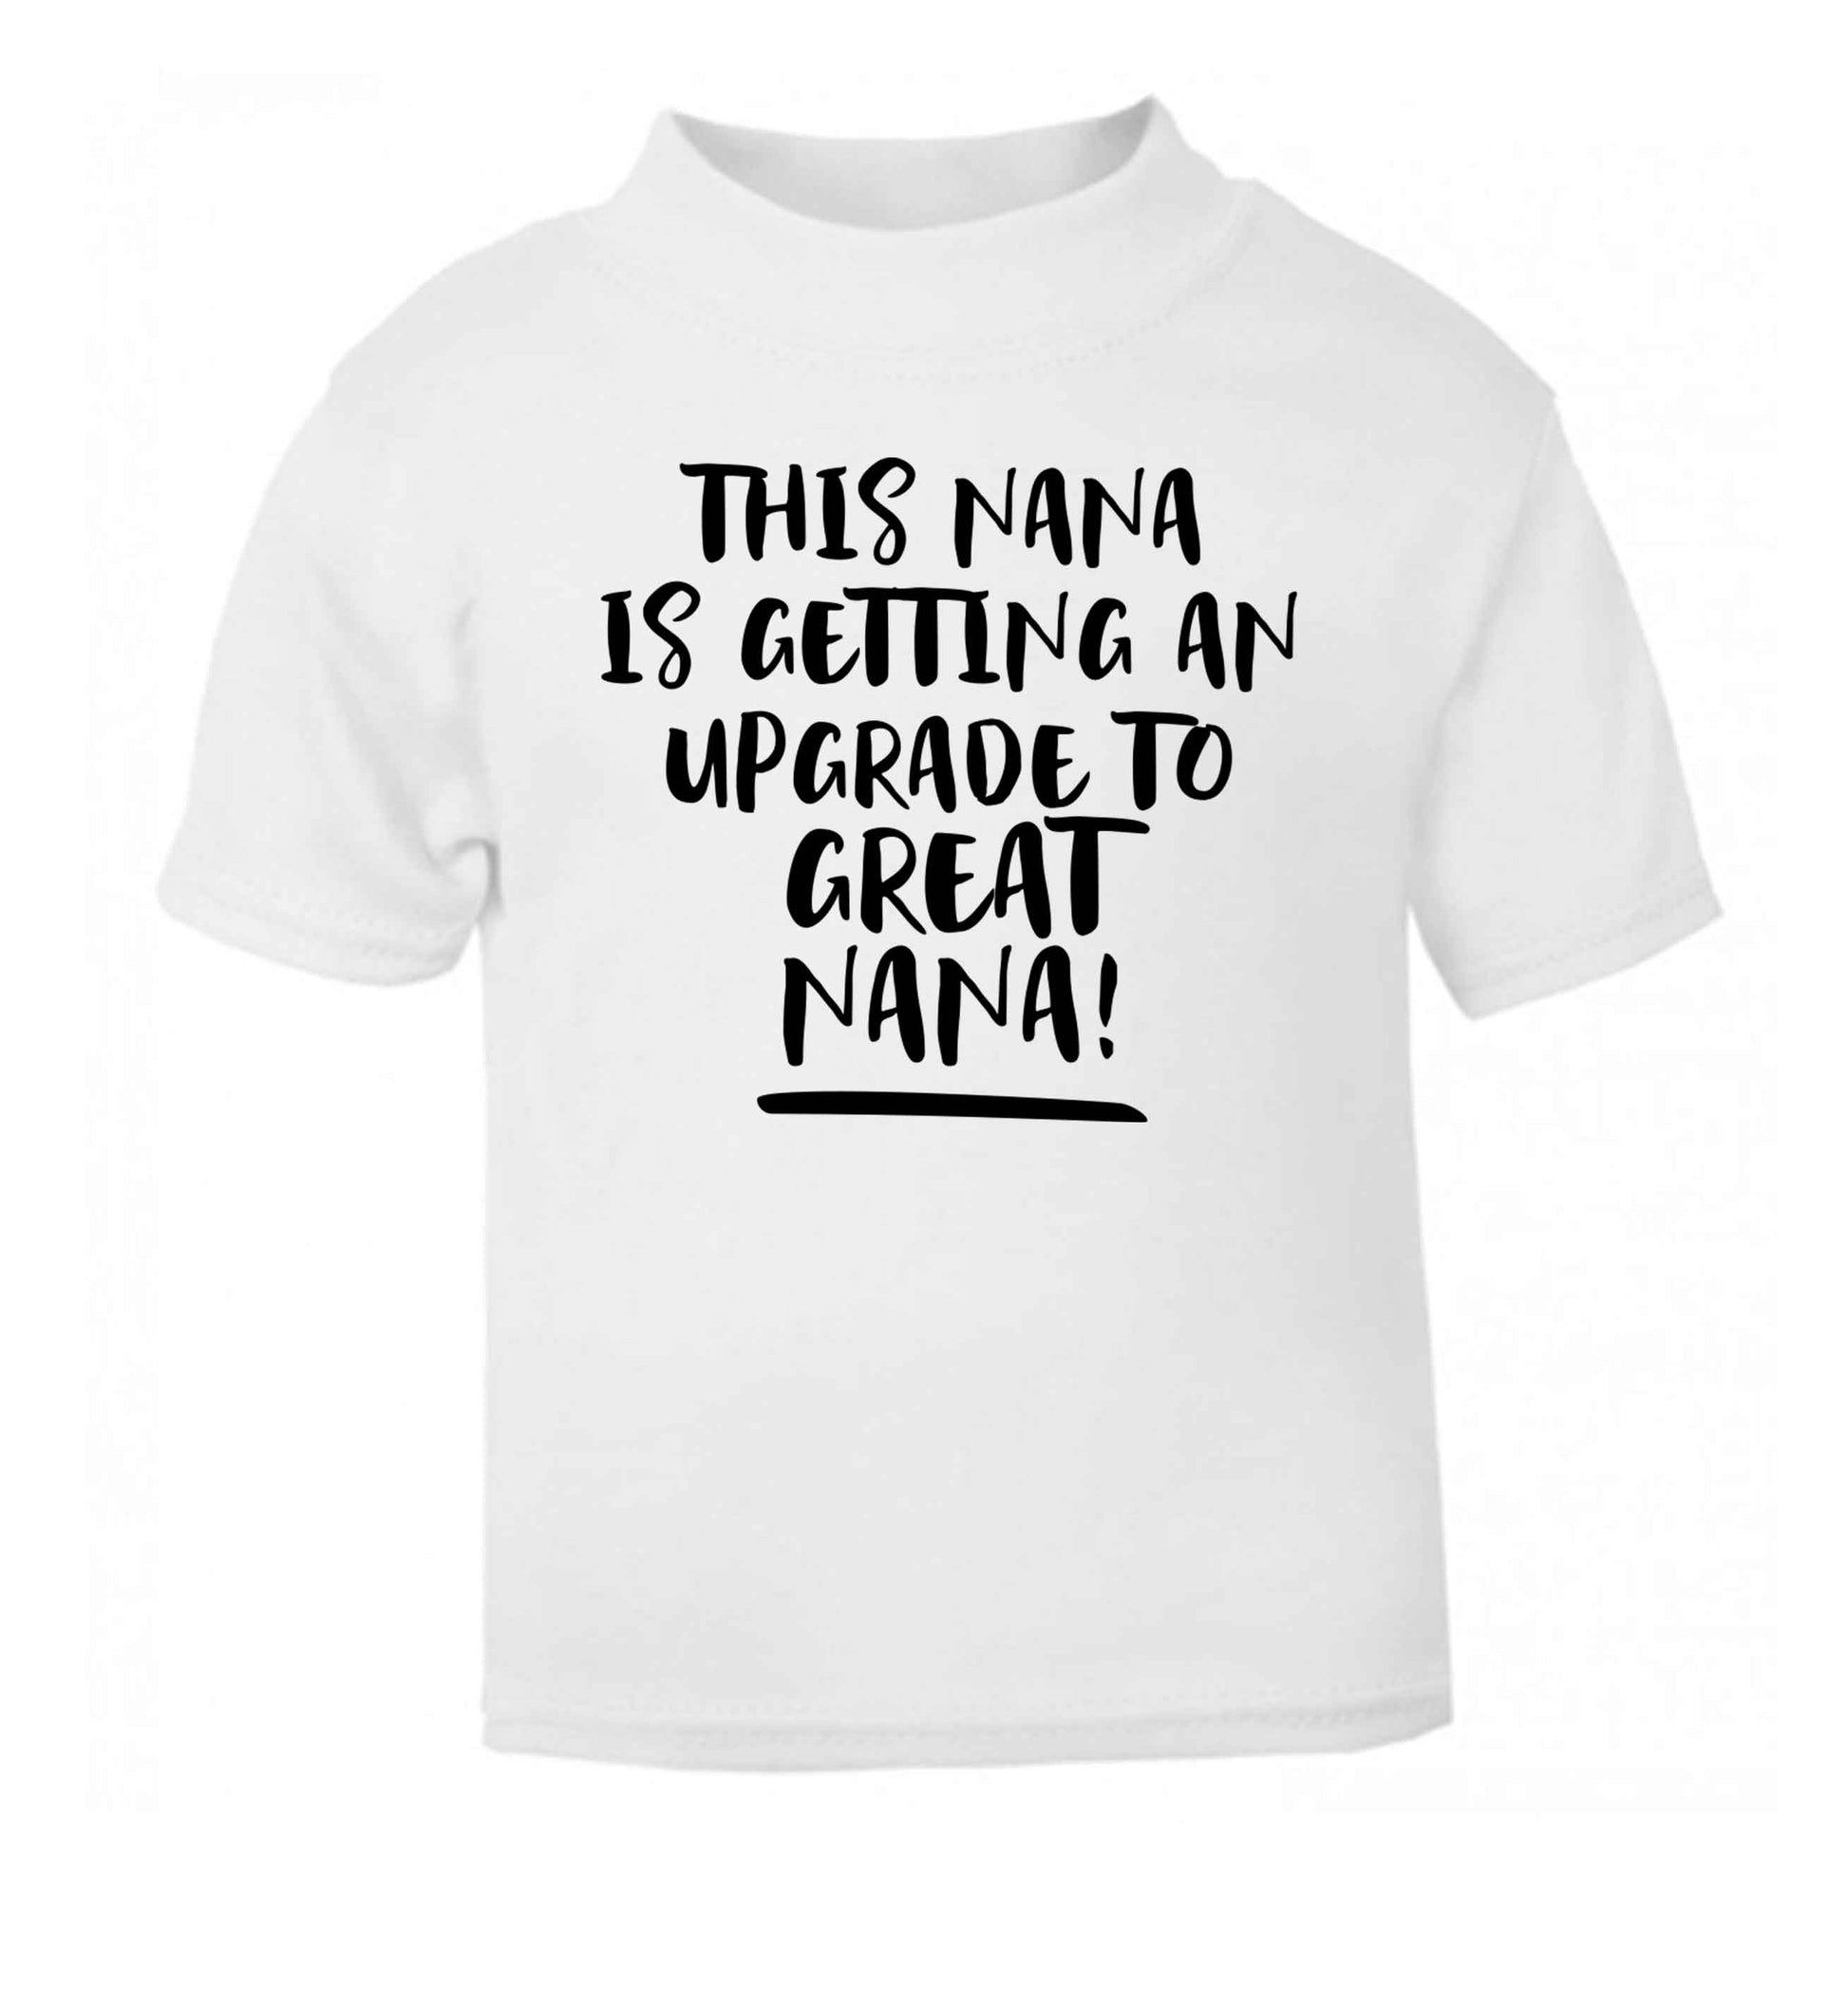 This nana is getting an upgrade to great nana! white Baby Toddler Tshirt 2 Years